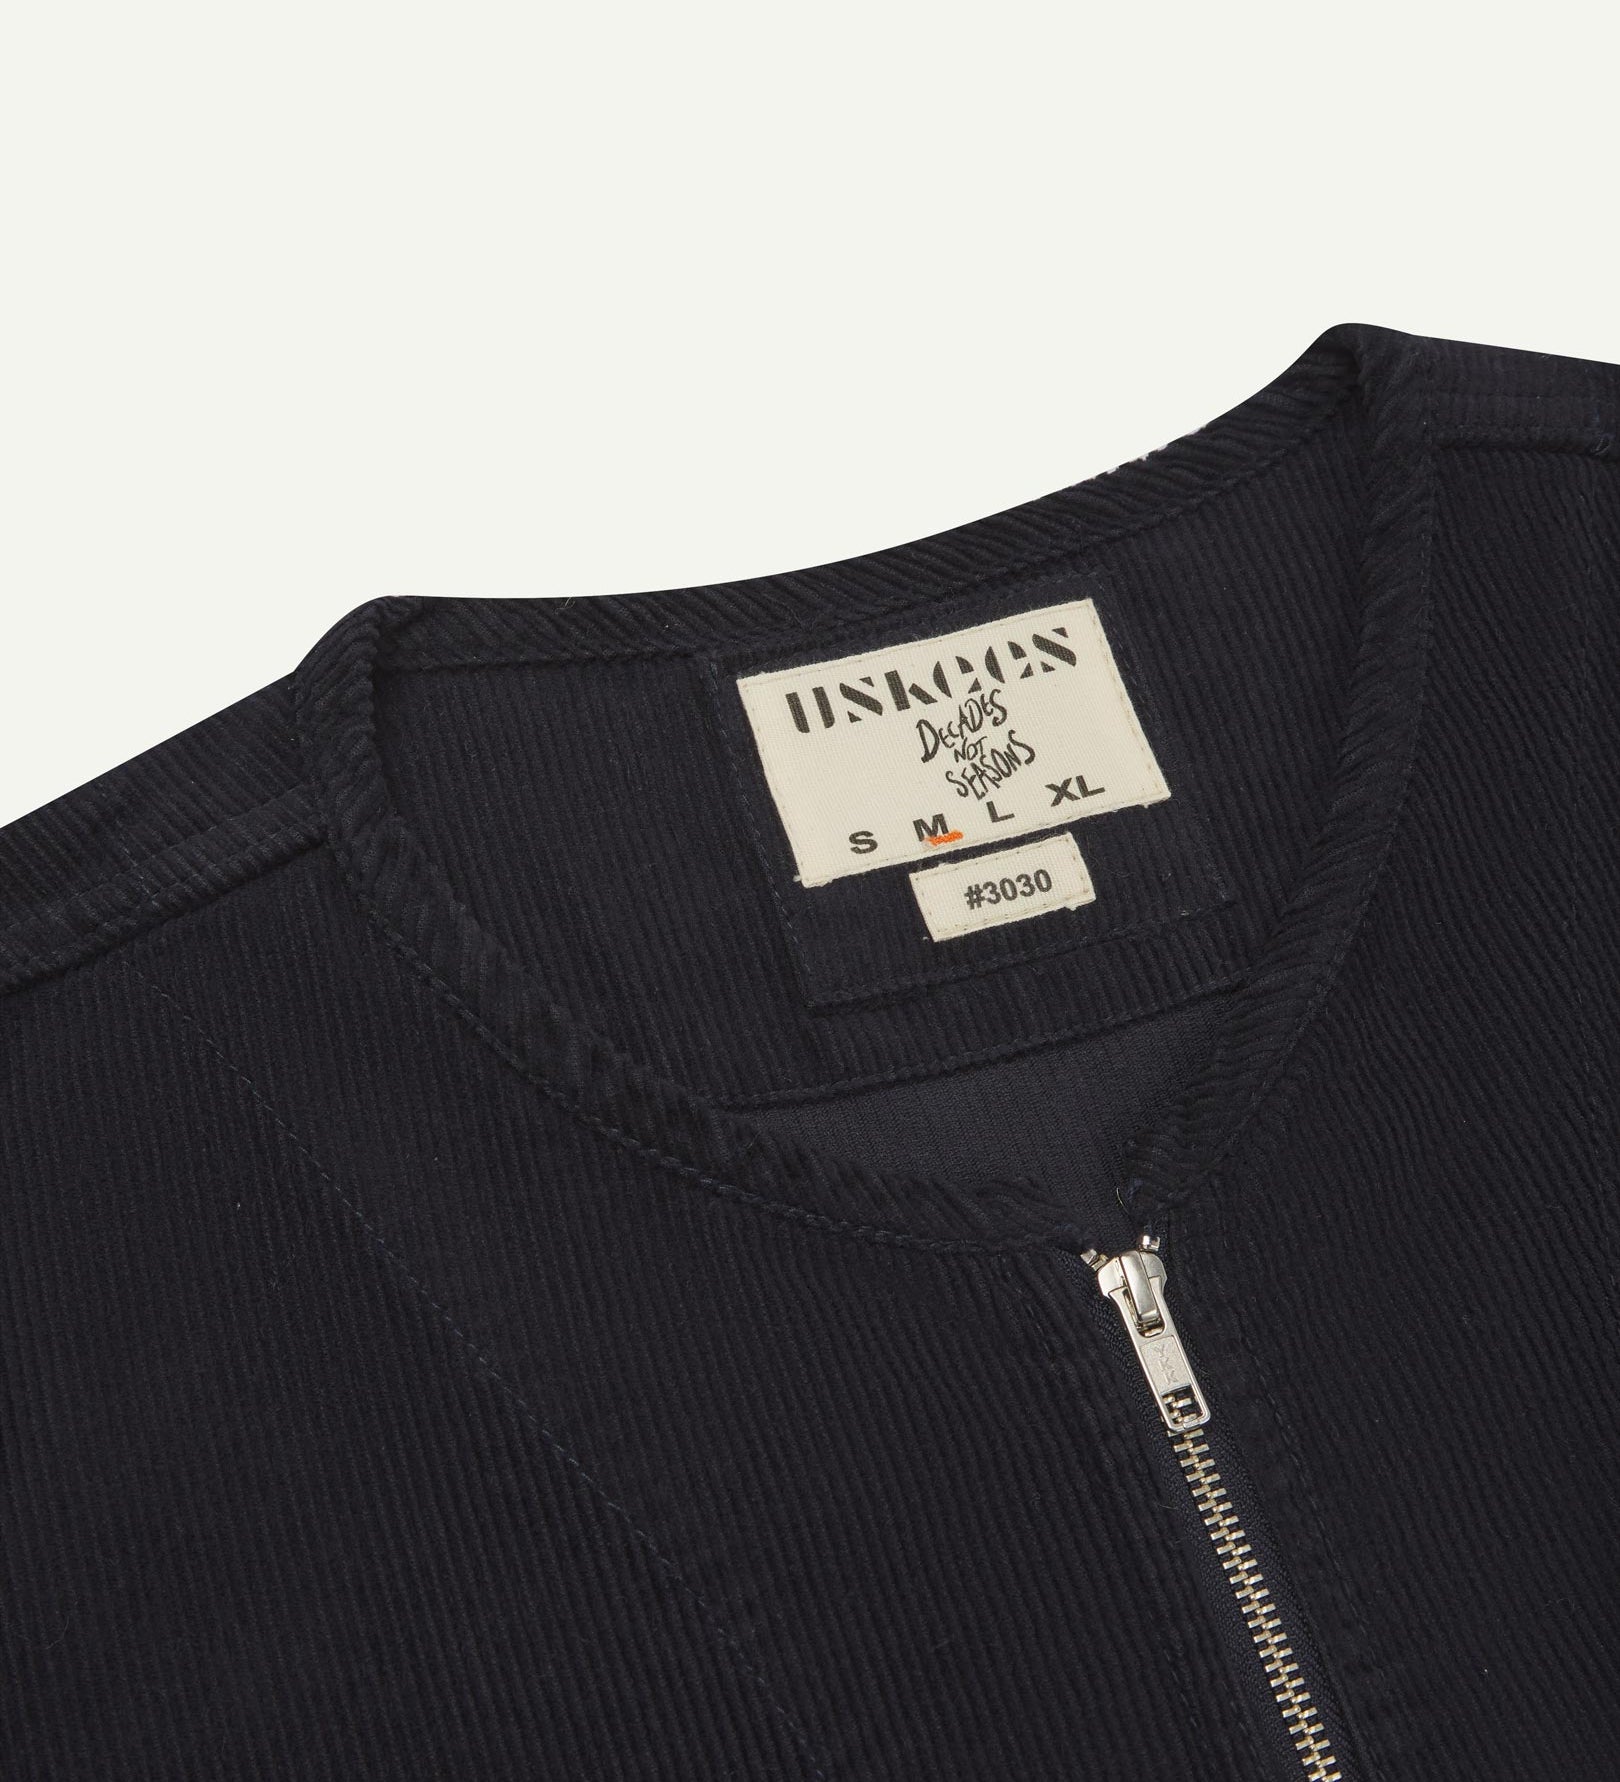 Angled close-up flat view of the neckline detailing of #3030 Uskees midnight blue jacket. View of monochrome Uskees label, 11-wale organic corduroy and YKK zip.